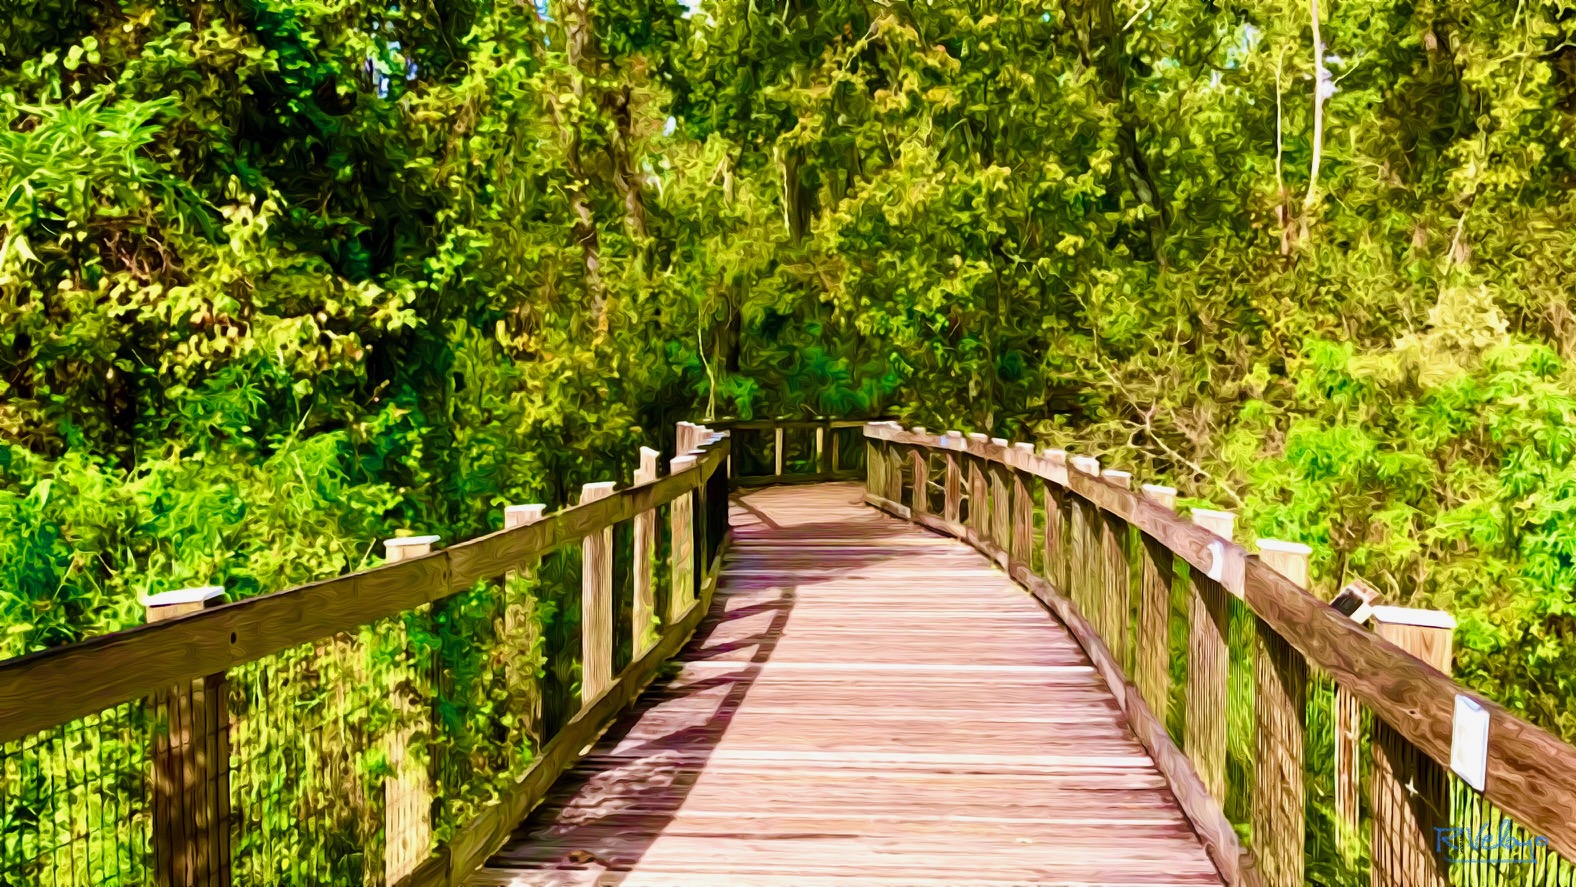 "WOODEN WALKWAY AT OAKLAND NATURE PRESERVE" [Created: 5/31/2021]